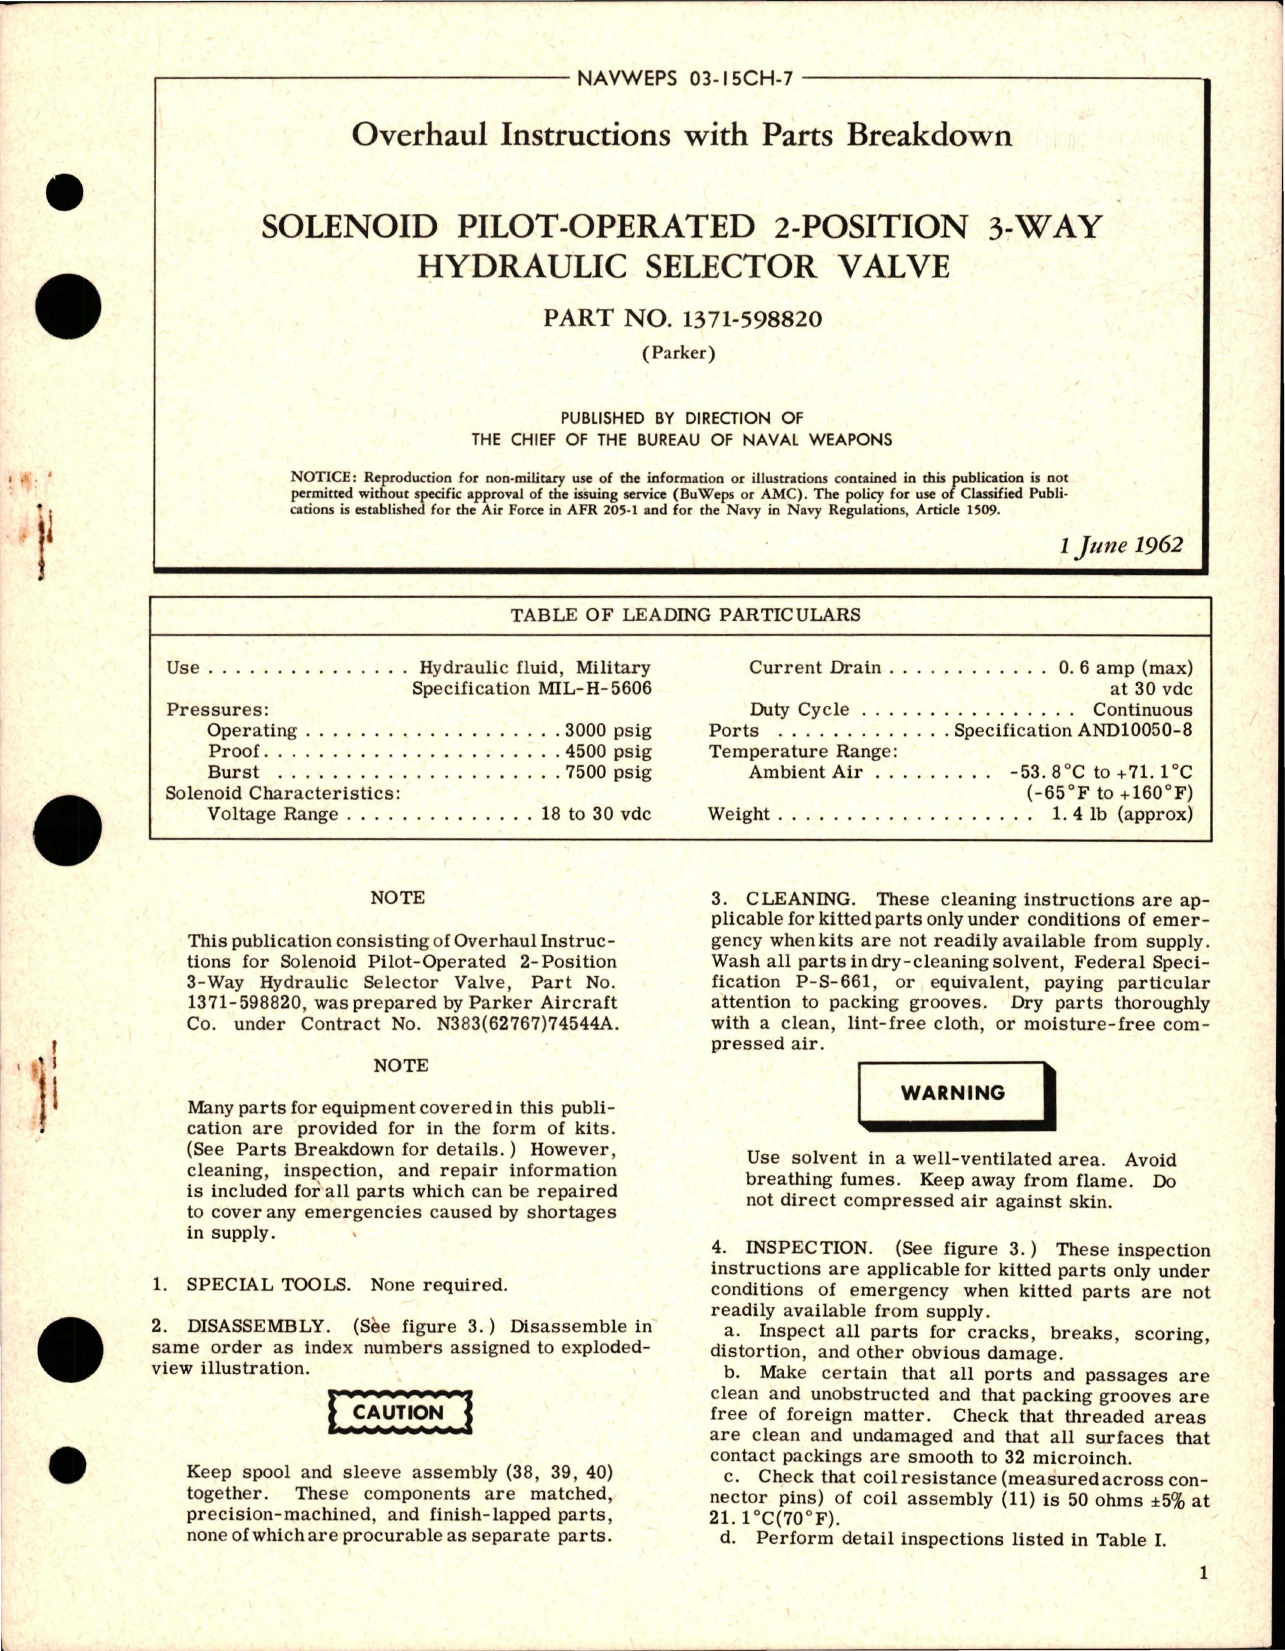 Sample page 1 from AirCorps Library document: Overhaul Instructions with Parts Breakdown for Solenoid Pilot Operated 2 Position 3 way Hydraulic Selector Valve - Part 1371-598820